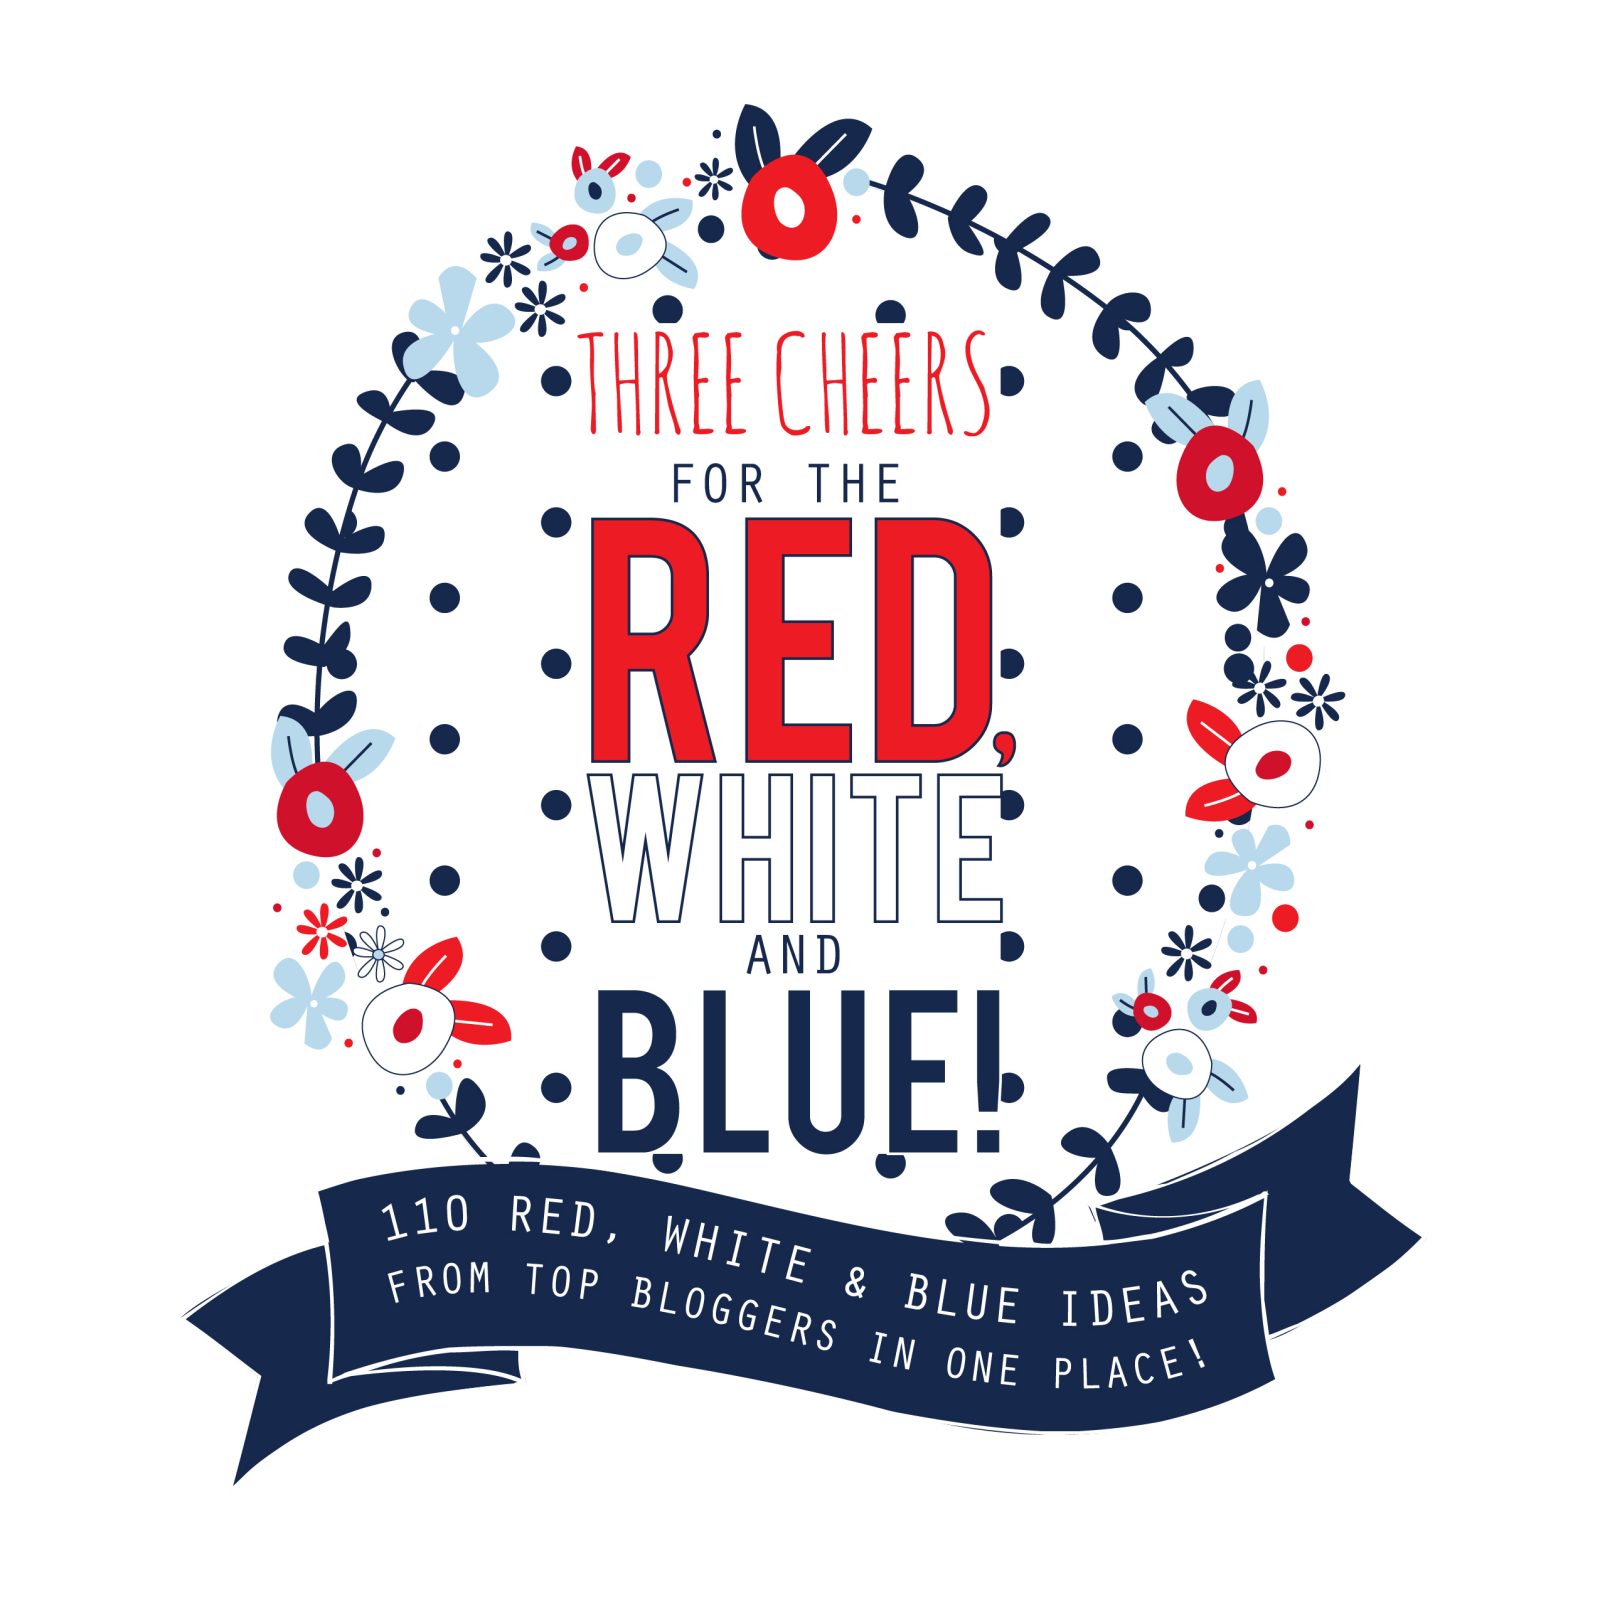 Three Cheers for the Red White and Blue final logo 2 Sweet Land of Liberty Printable 14